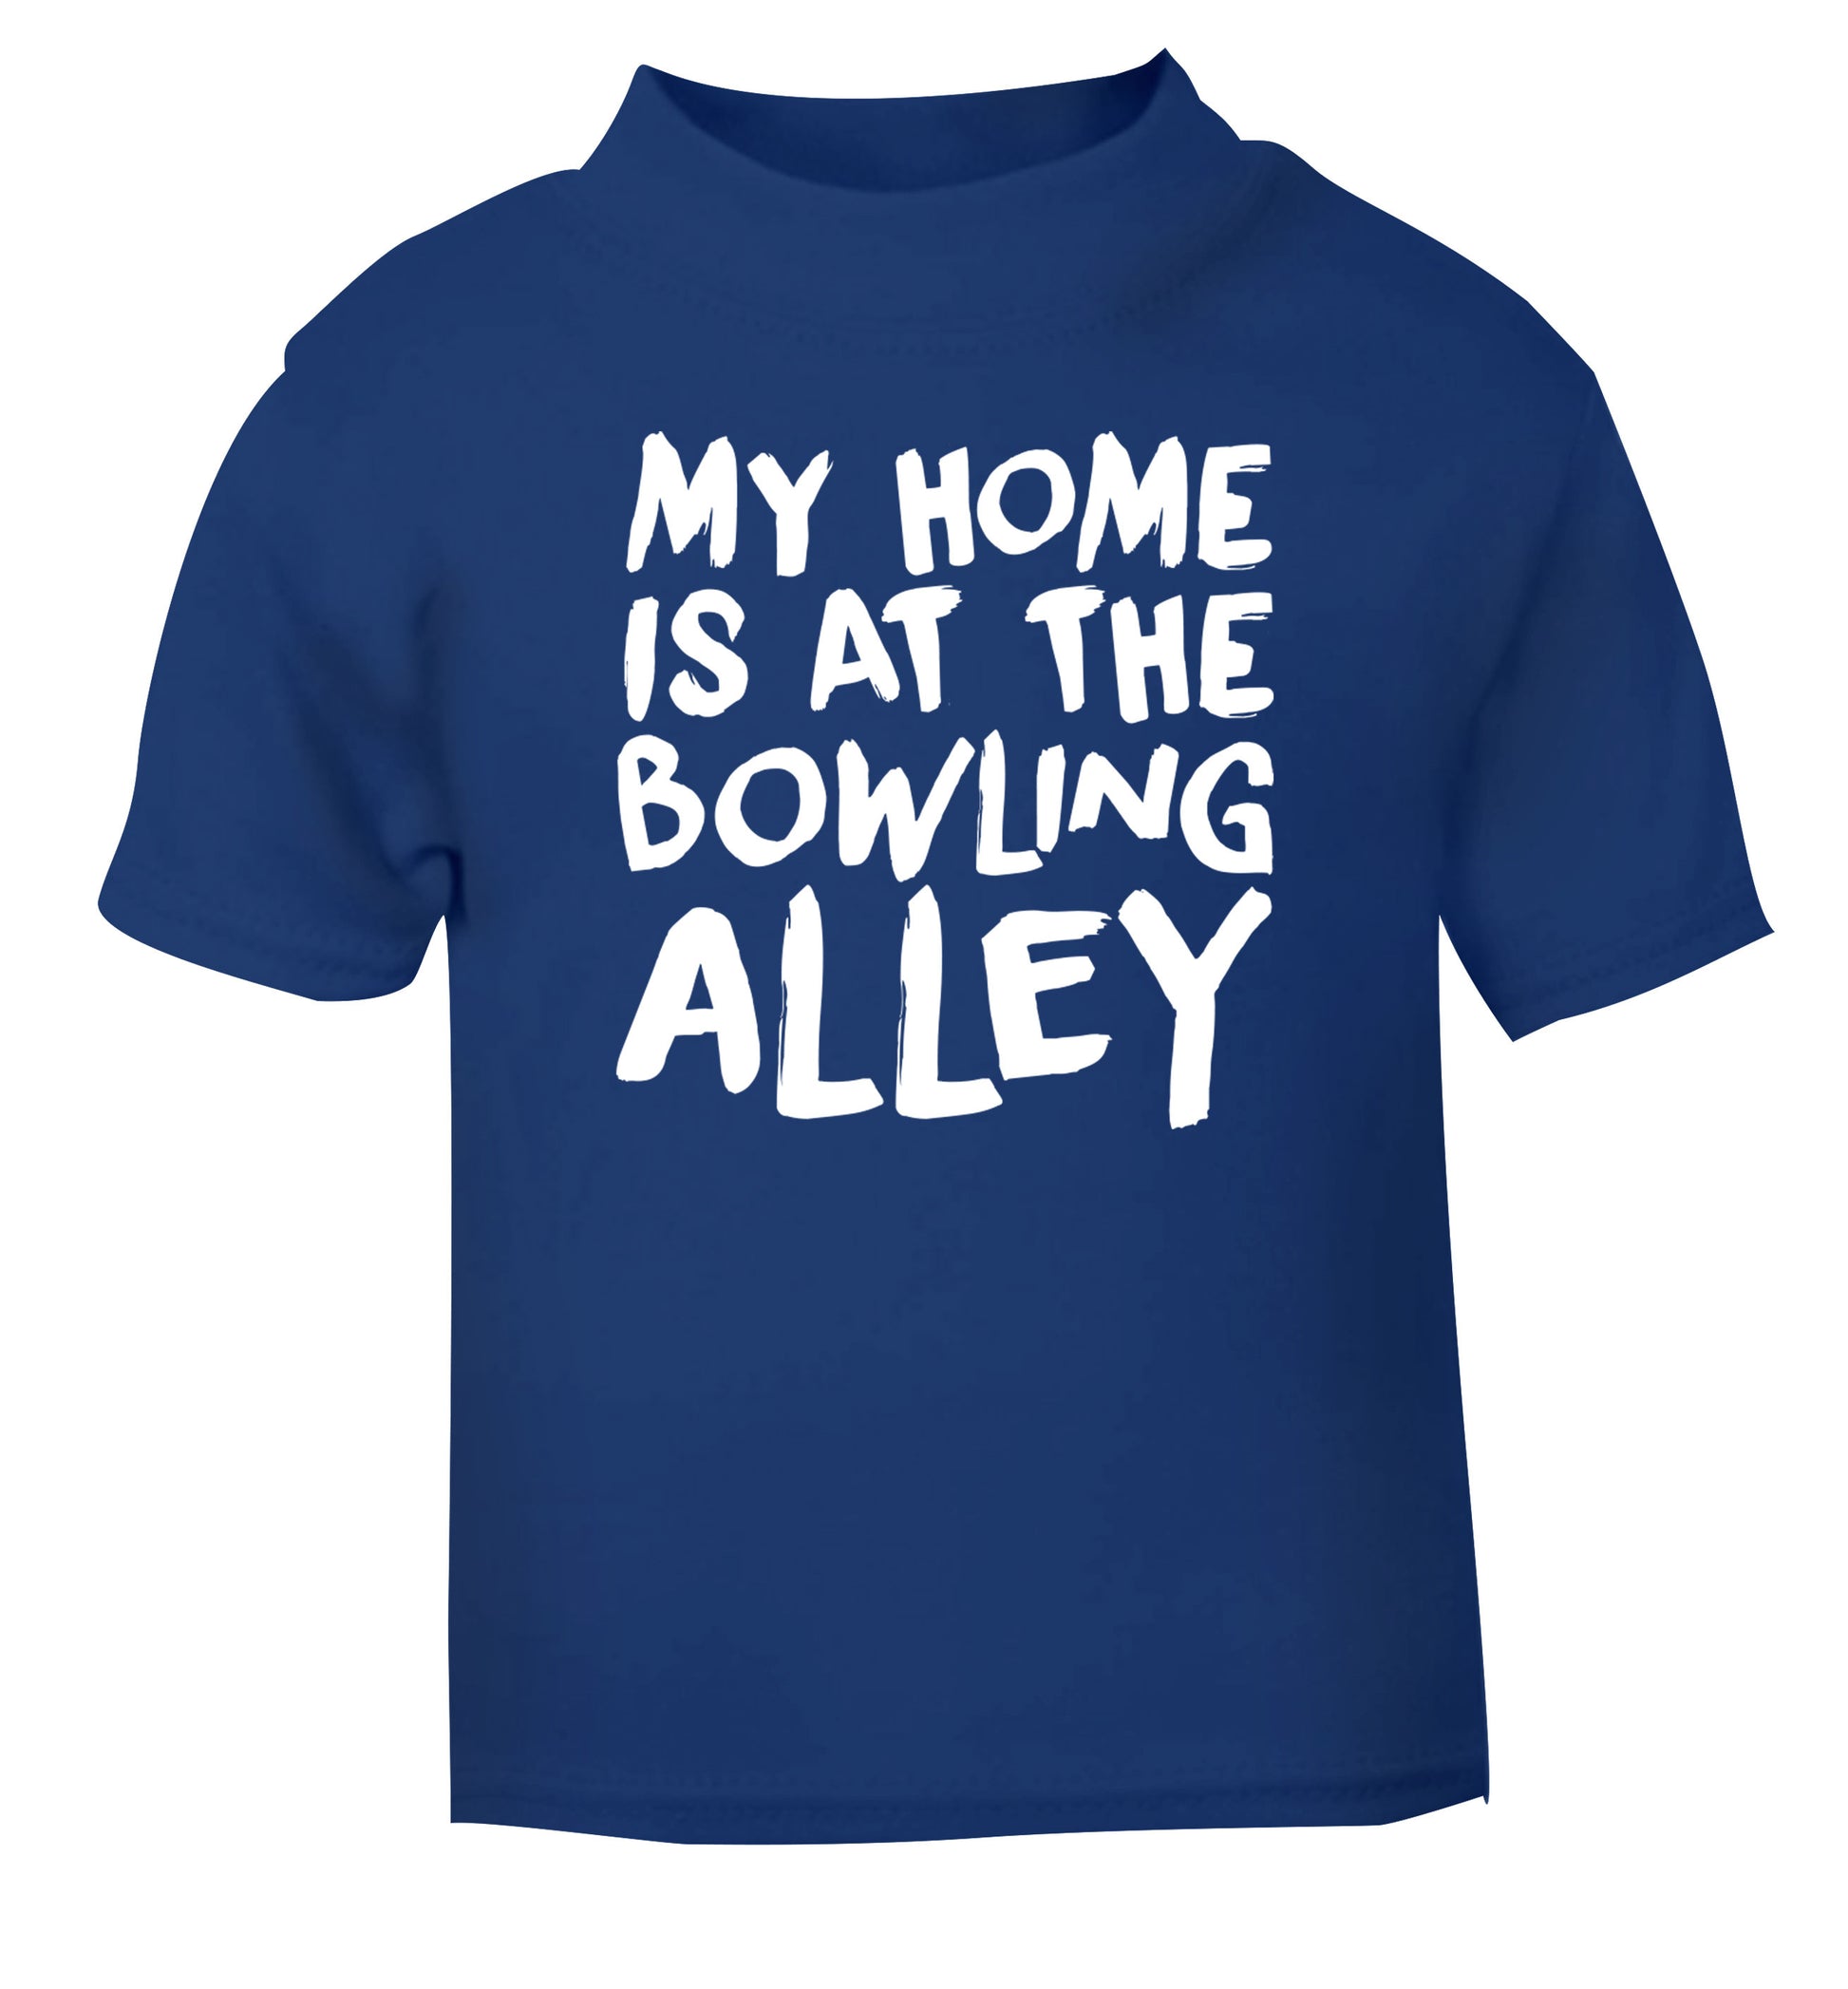 My home is at the bowling alley blue Baby Toddler Tshirt 2 Years